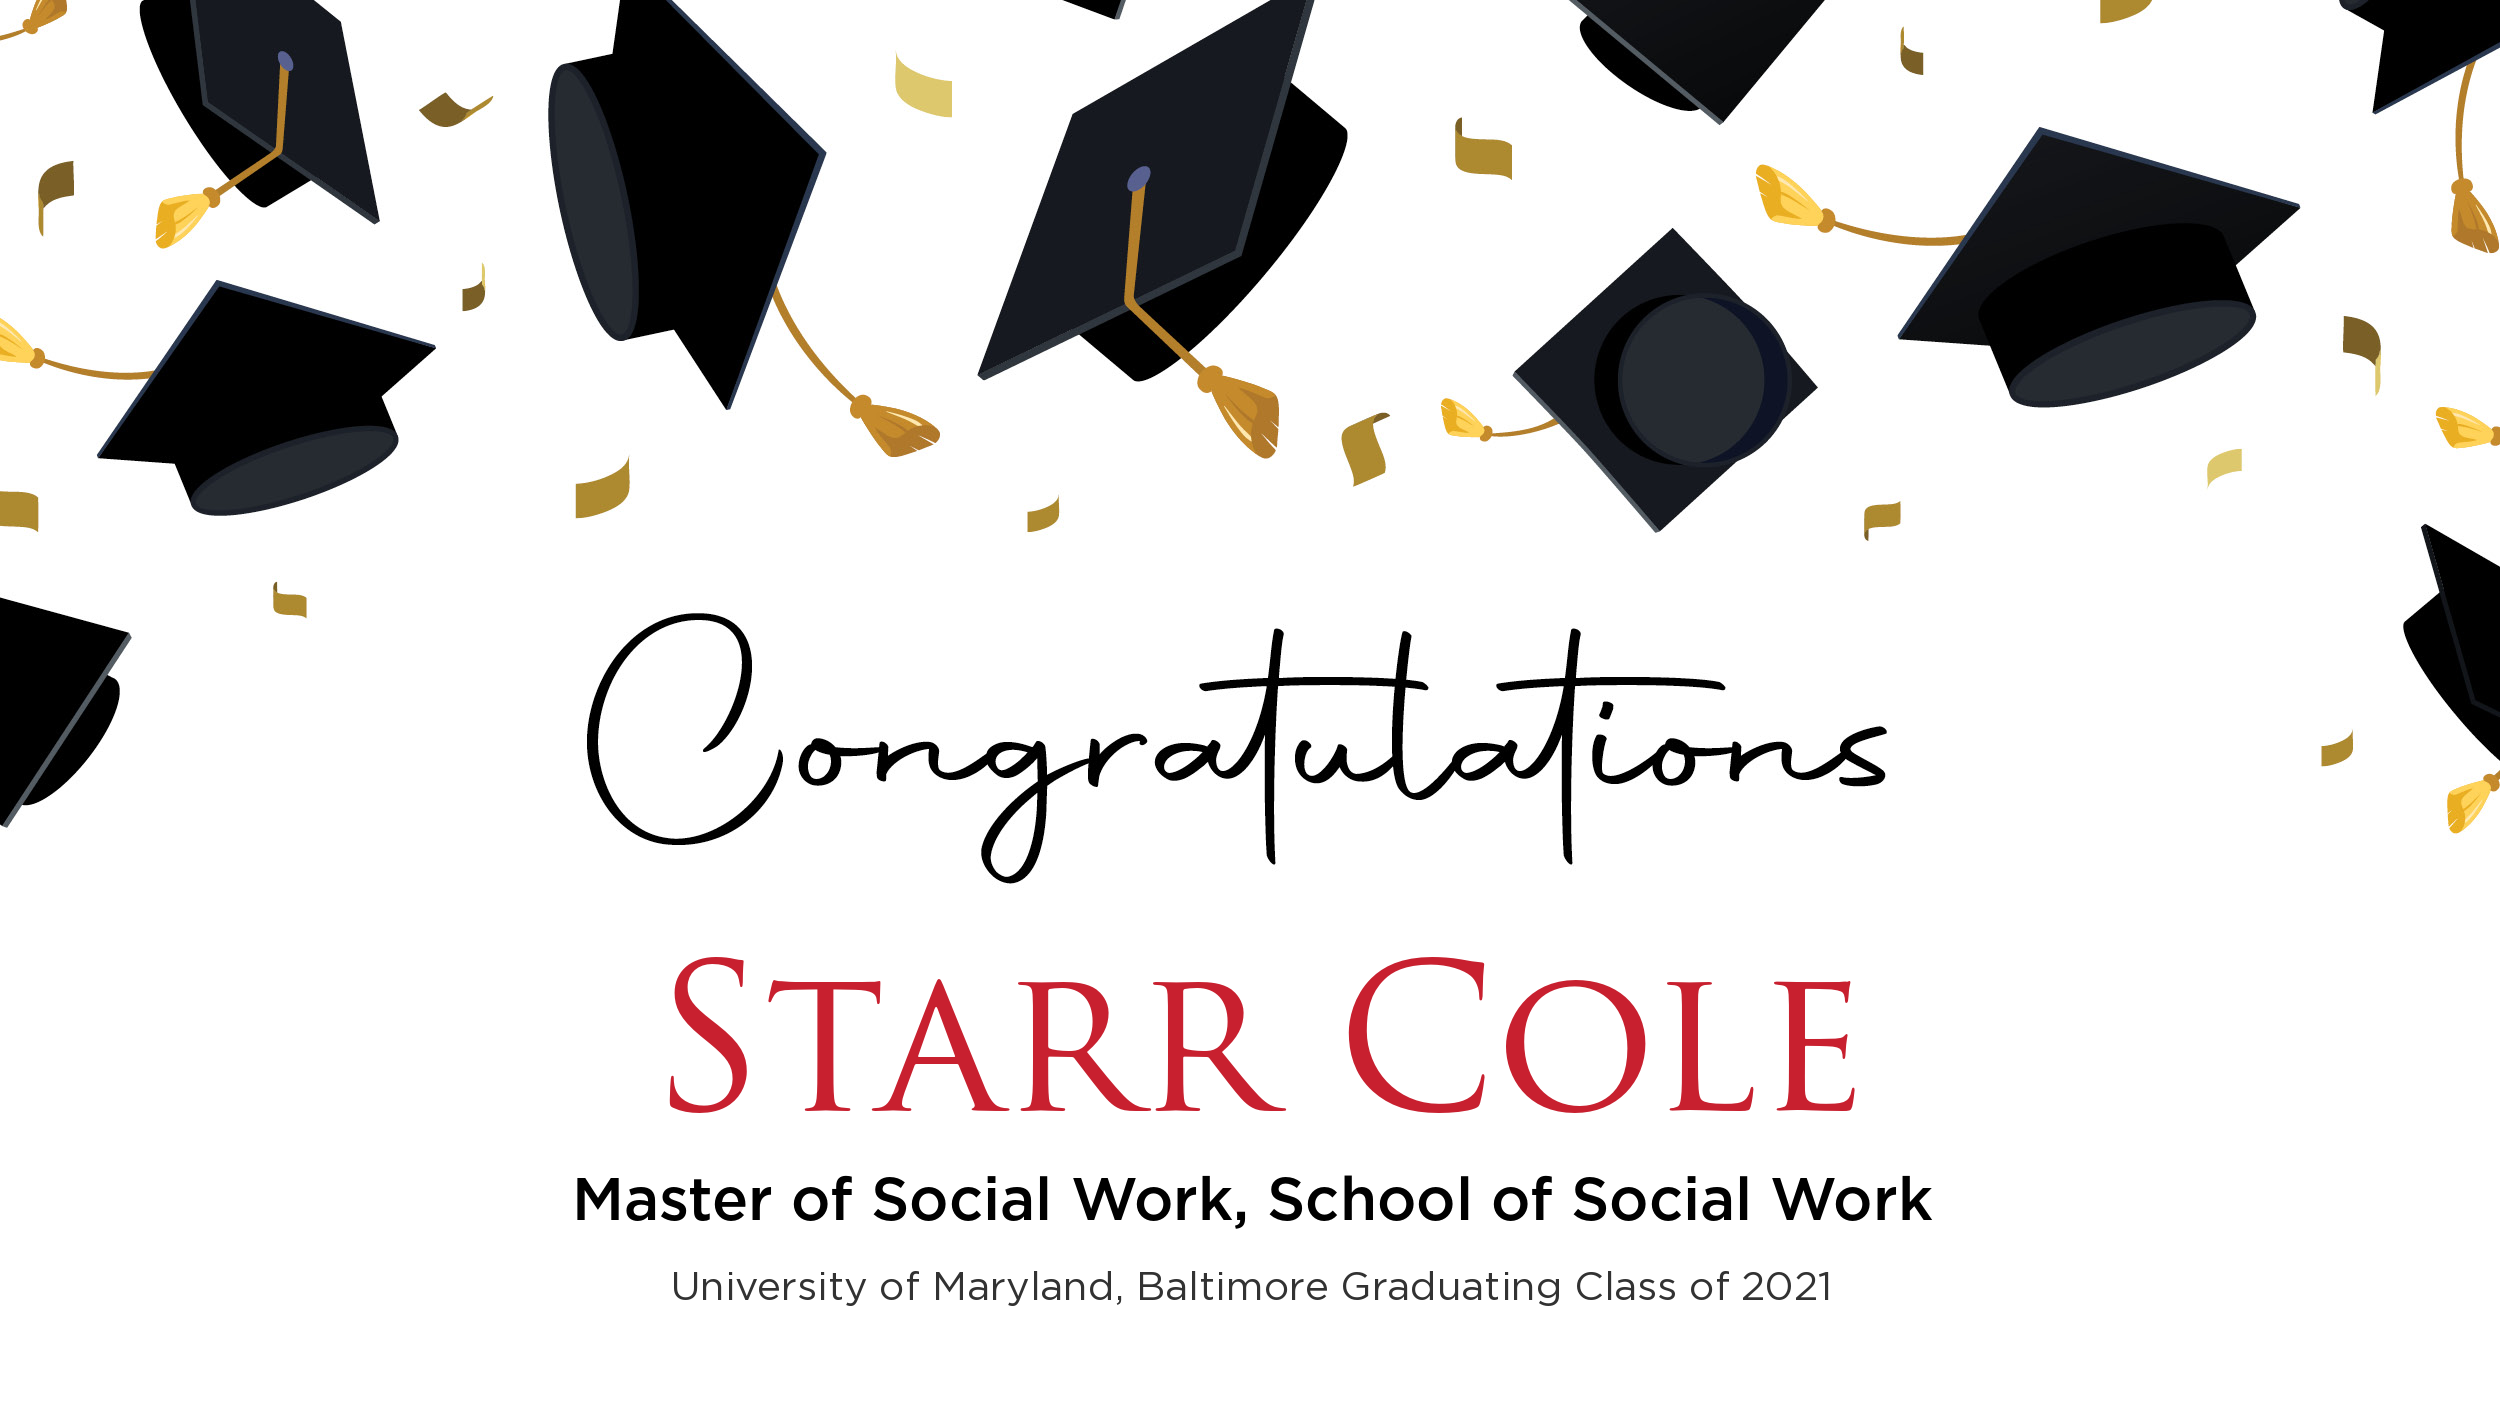 Congratulations Starr Cole, Master of Social Work